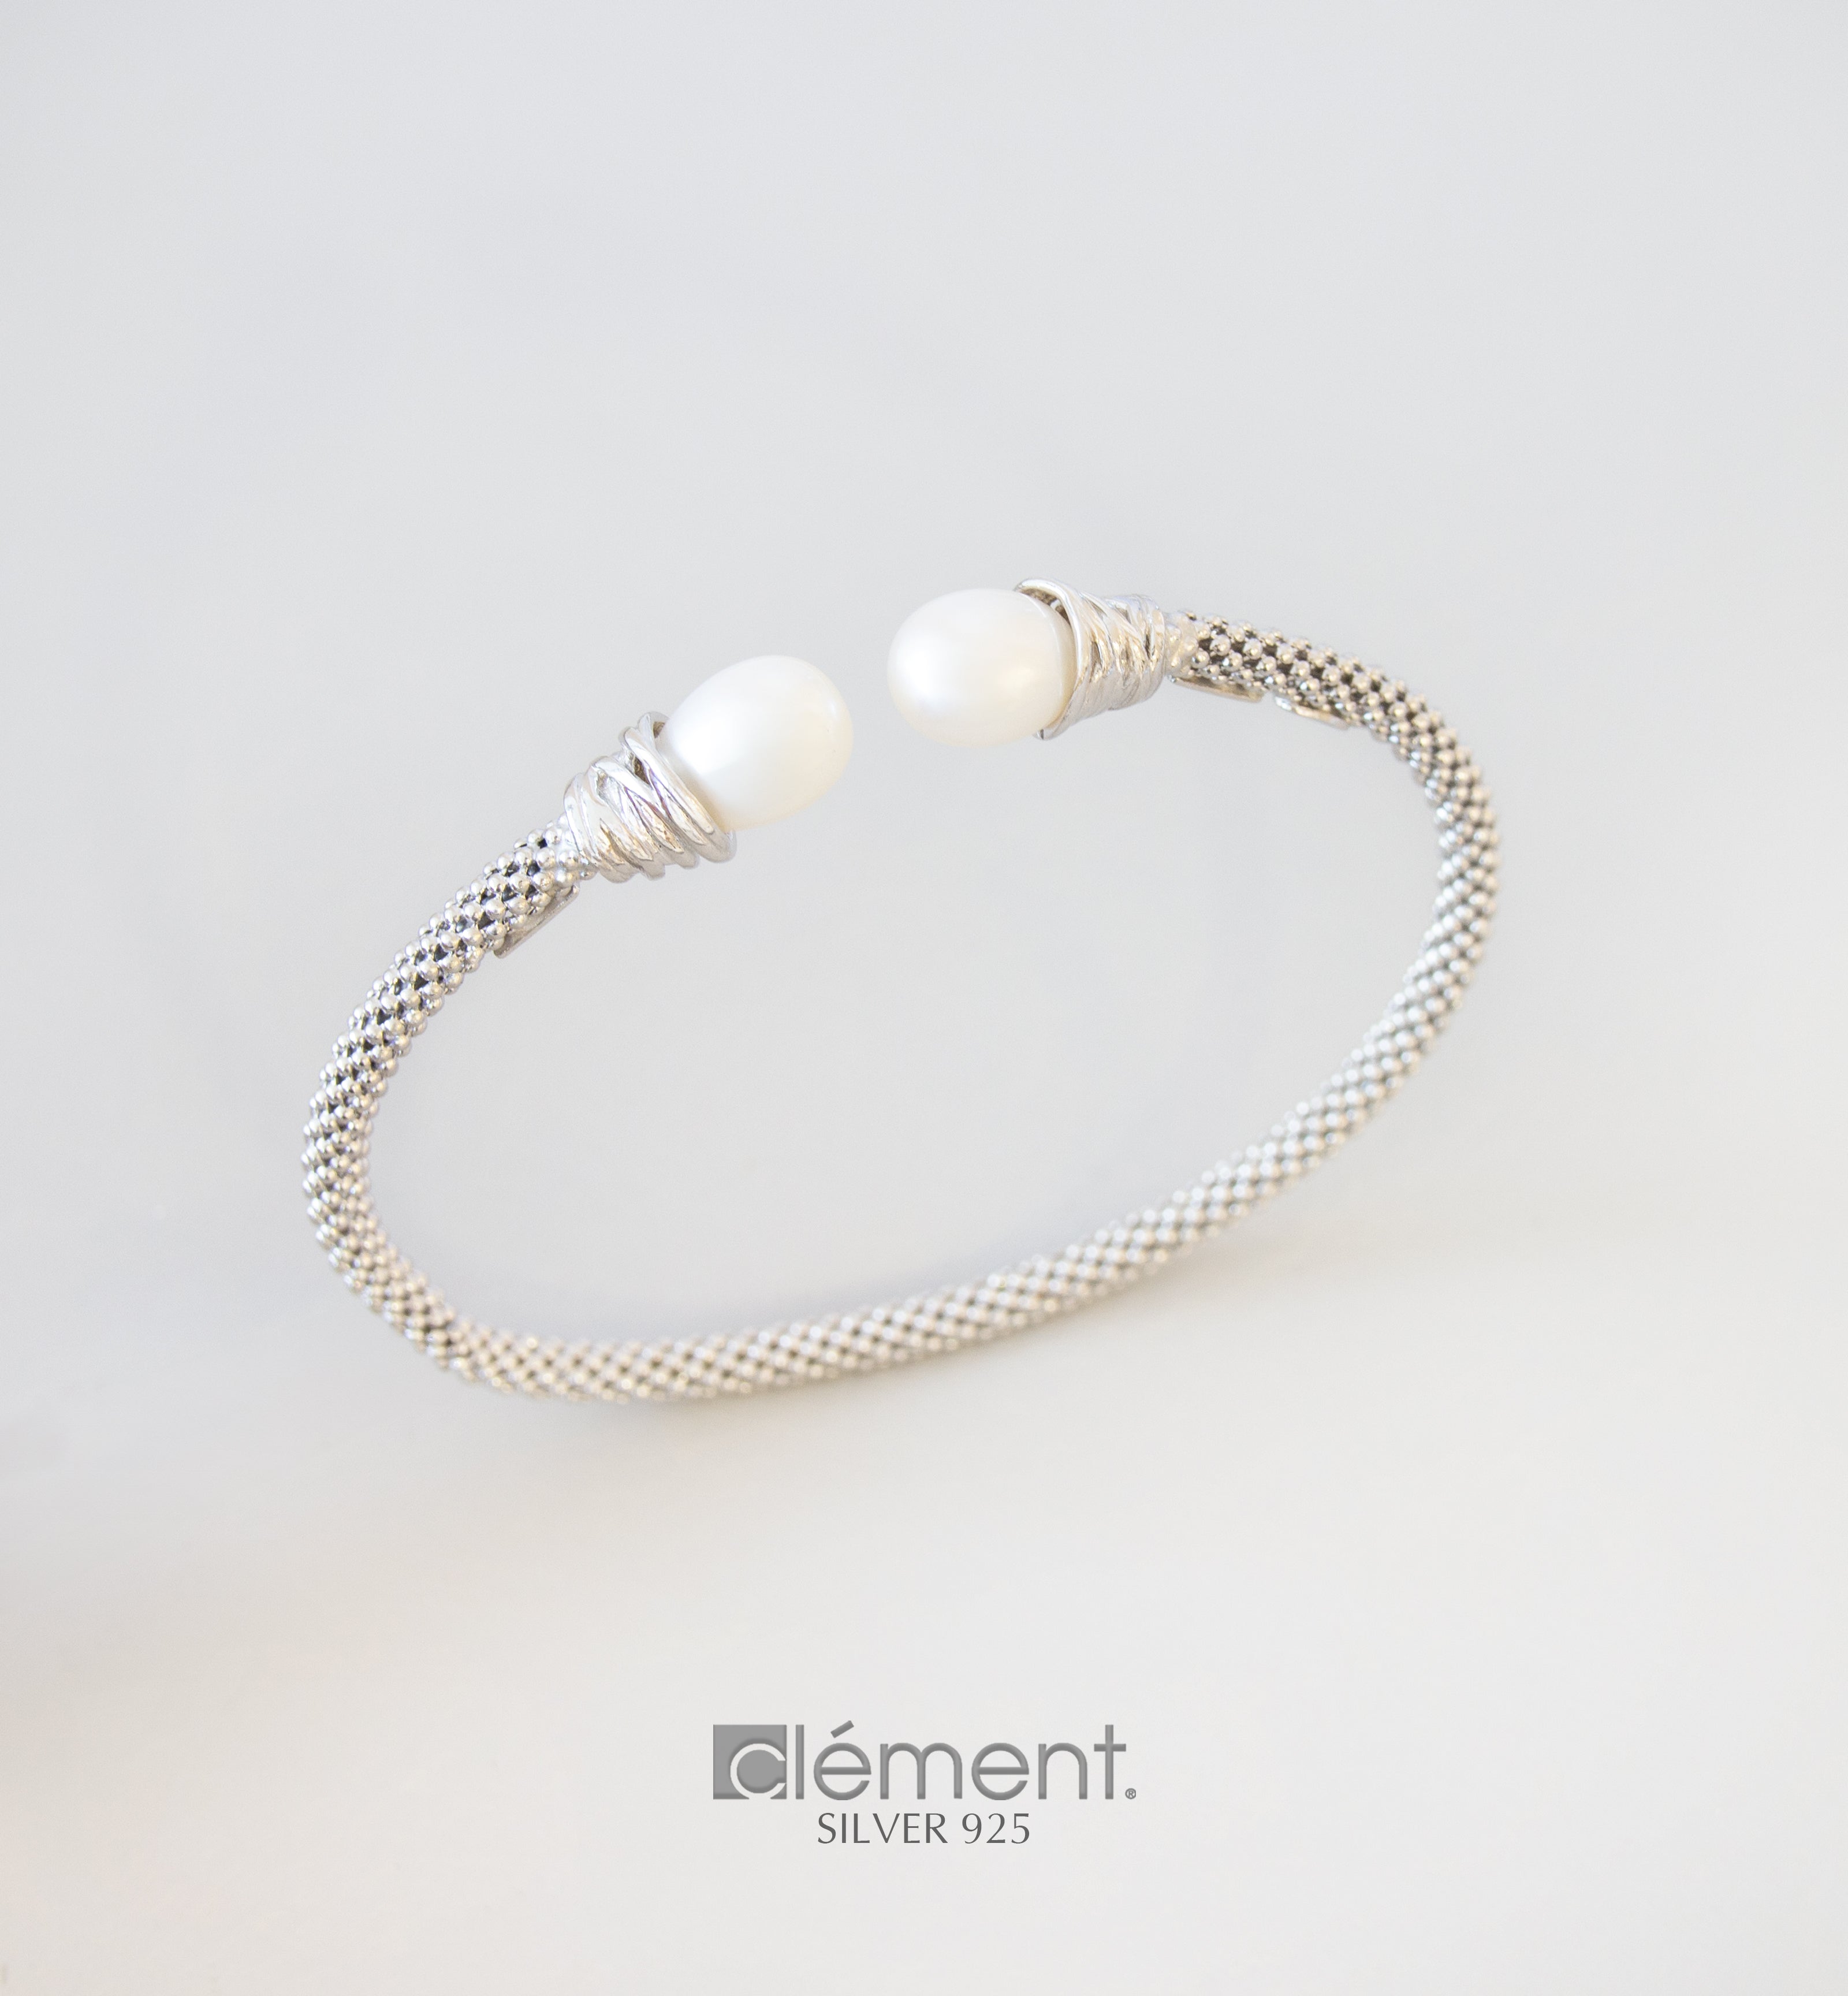 Silver 925 Design Bangle with Pearls